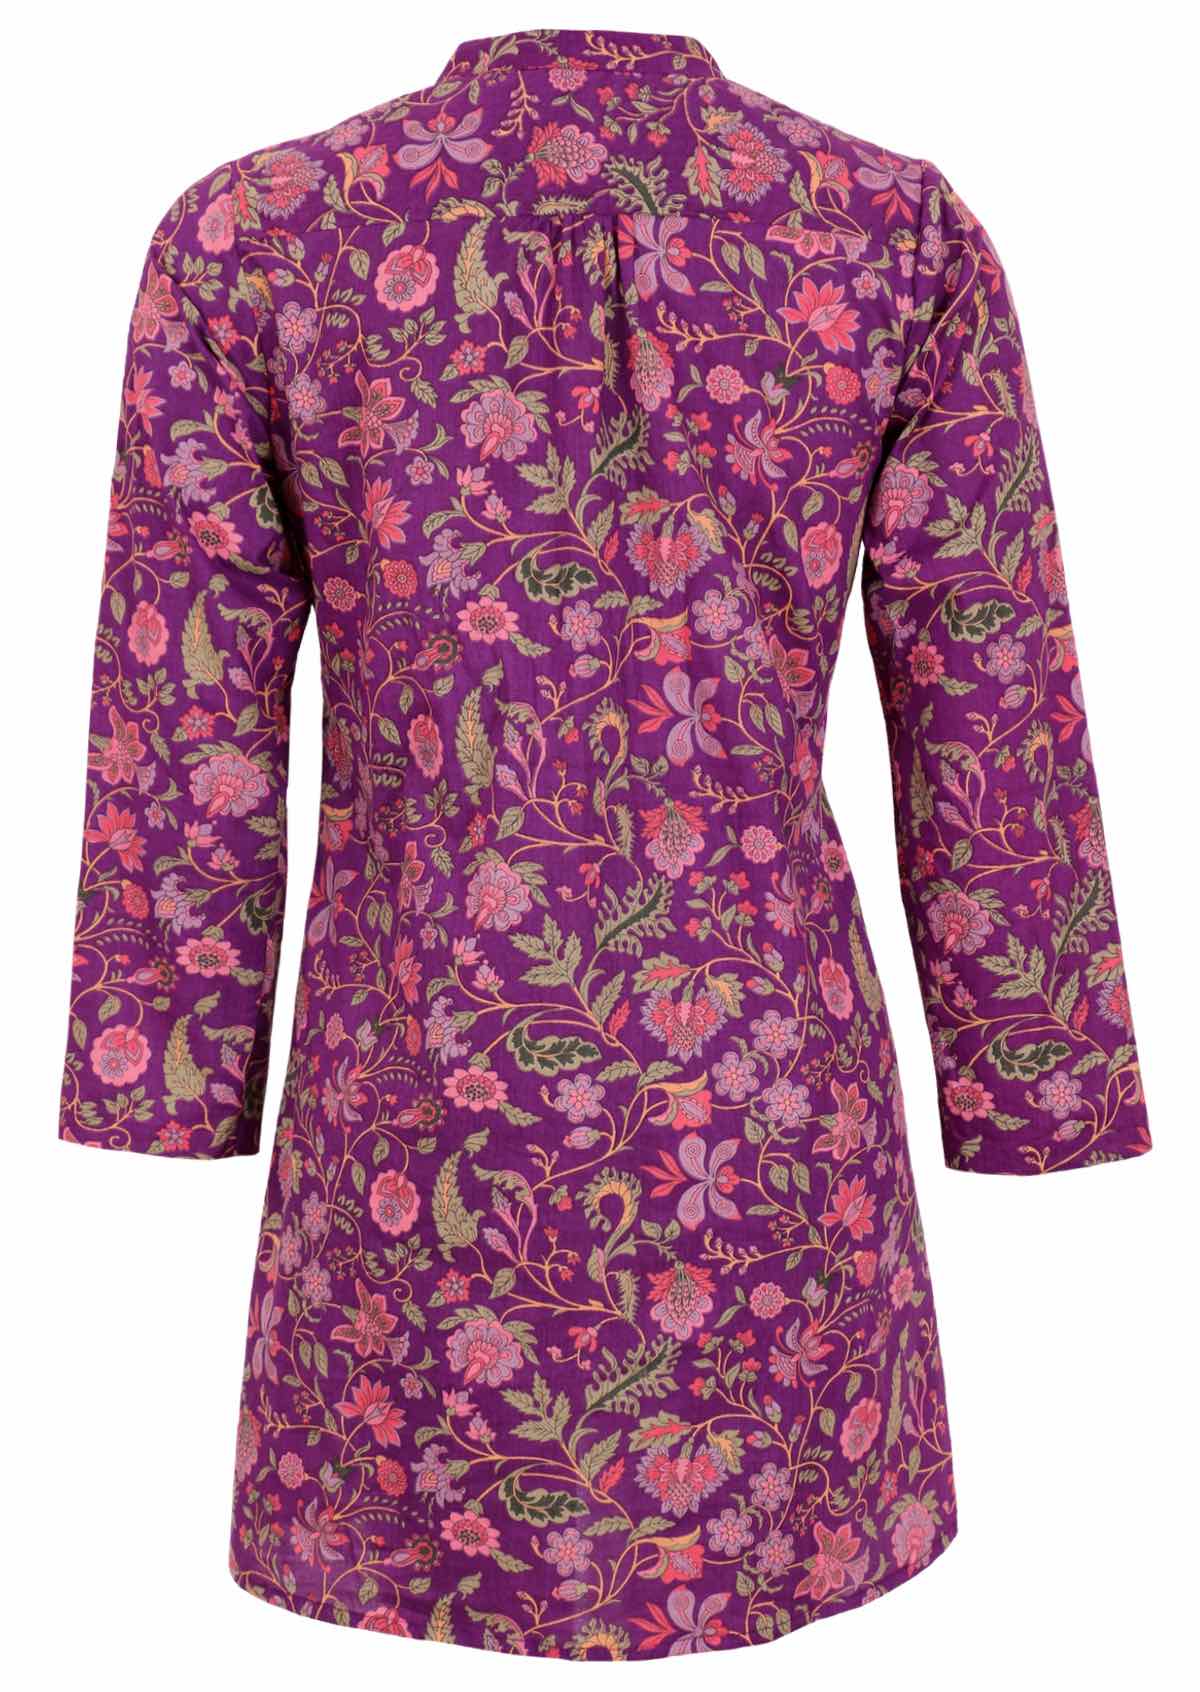 Cotton long sleeve tunic in sweet purple floral print